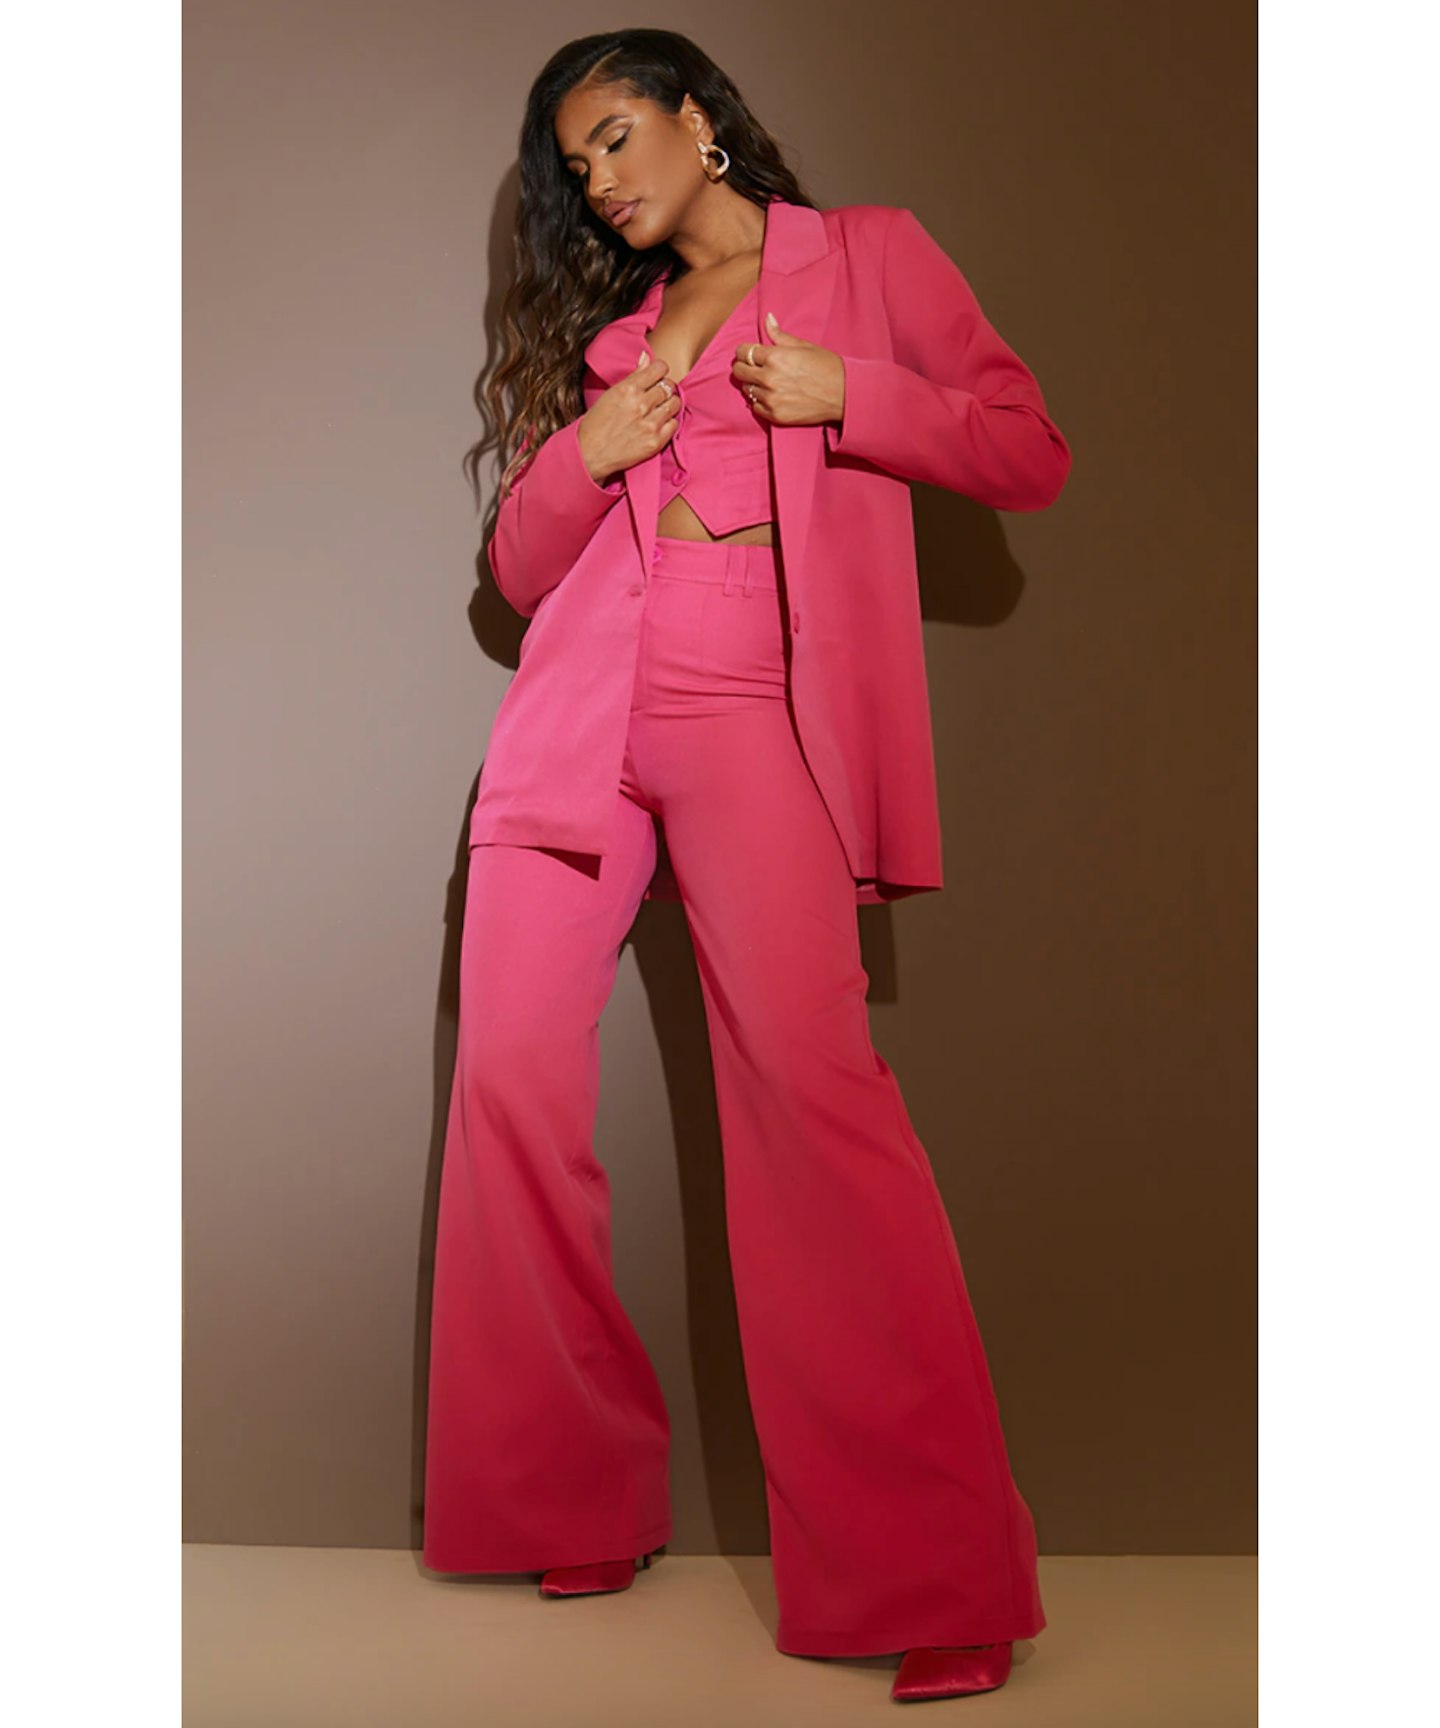 Hot Pink Woven Oversized Suit Jacket